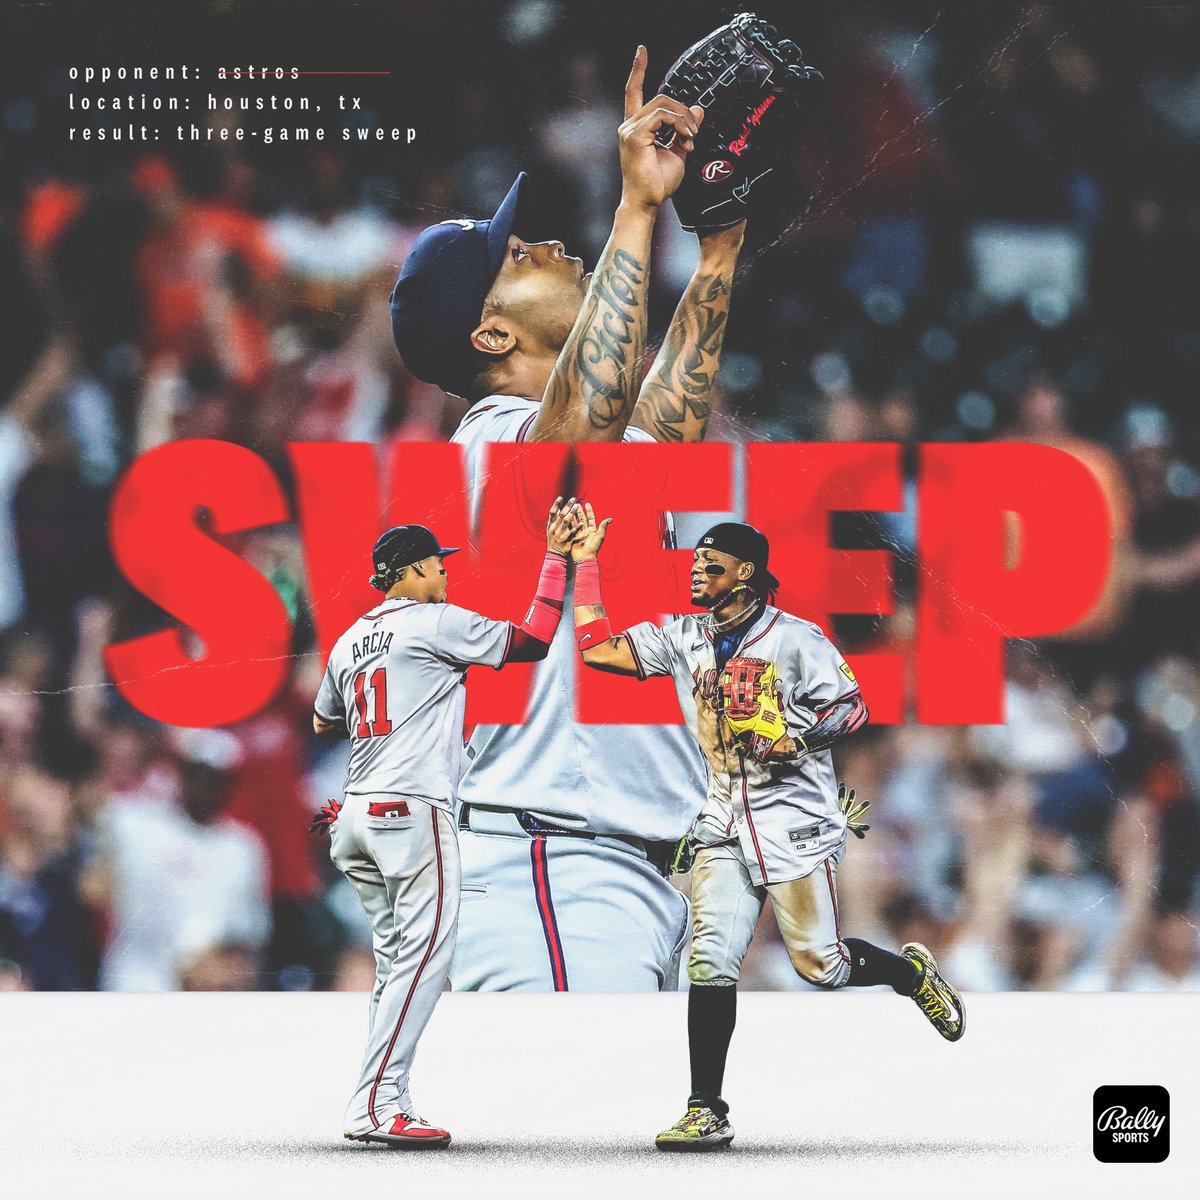 Sweep dreams in Space City. The @Braves had fun in Houston (again).